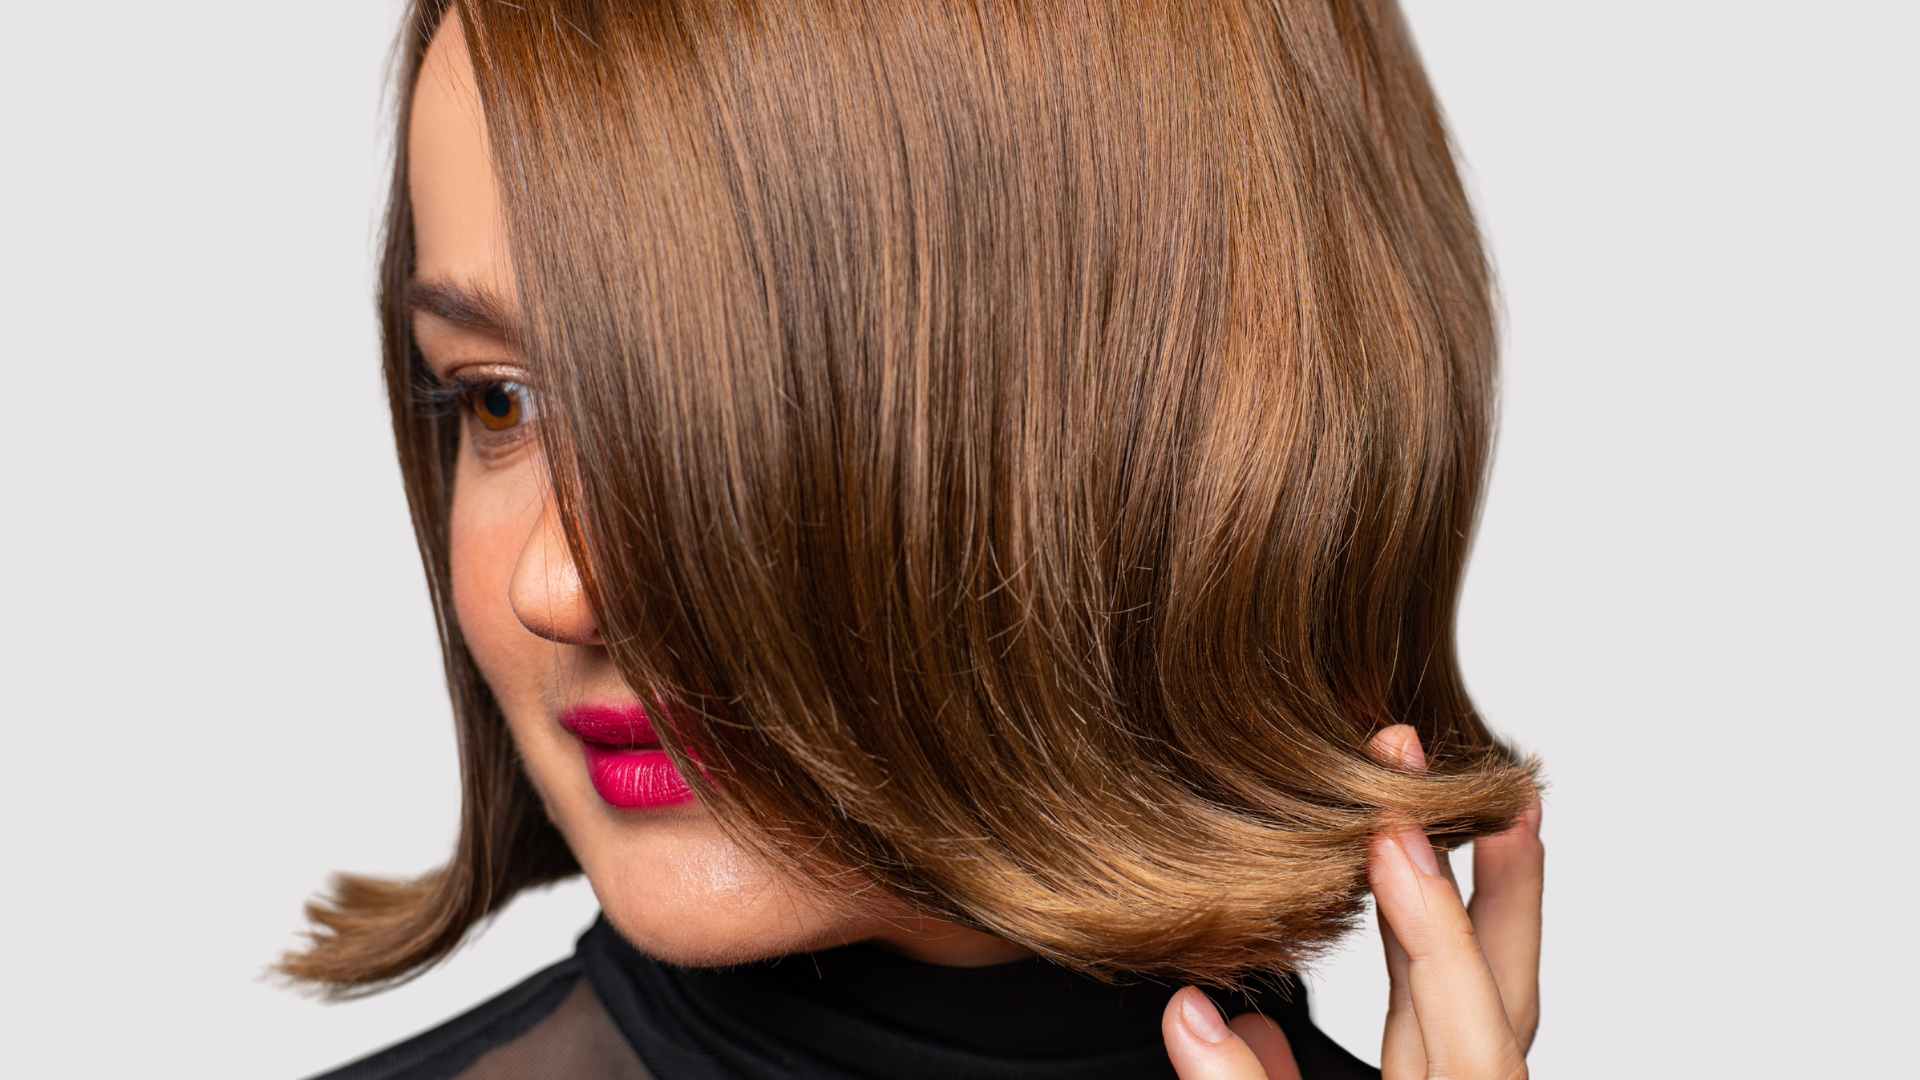 Female with short bob hairstyle with volume at ends of hair